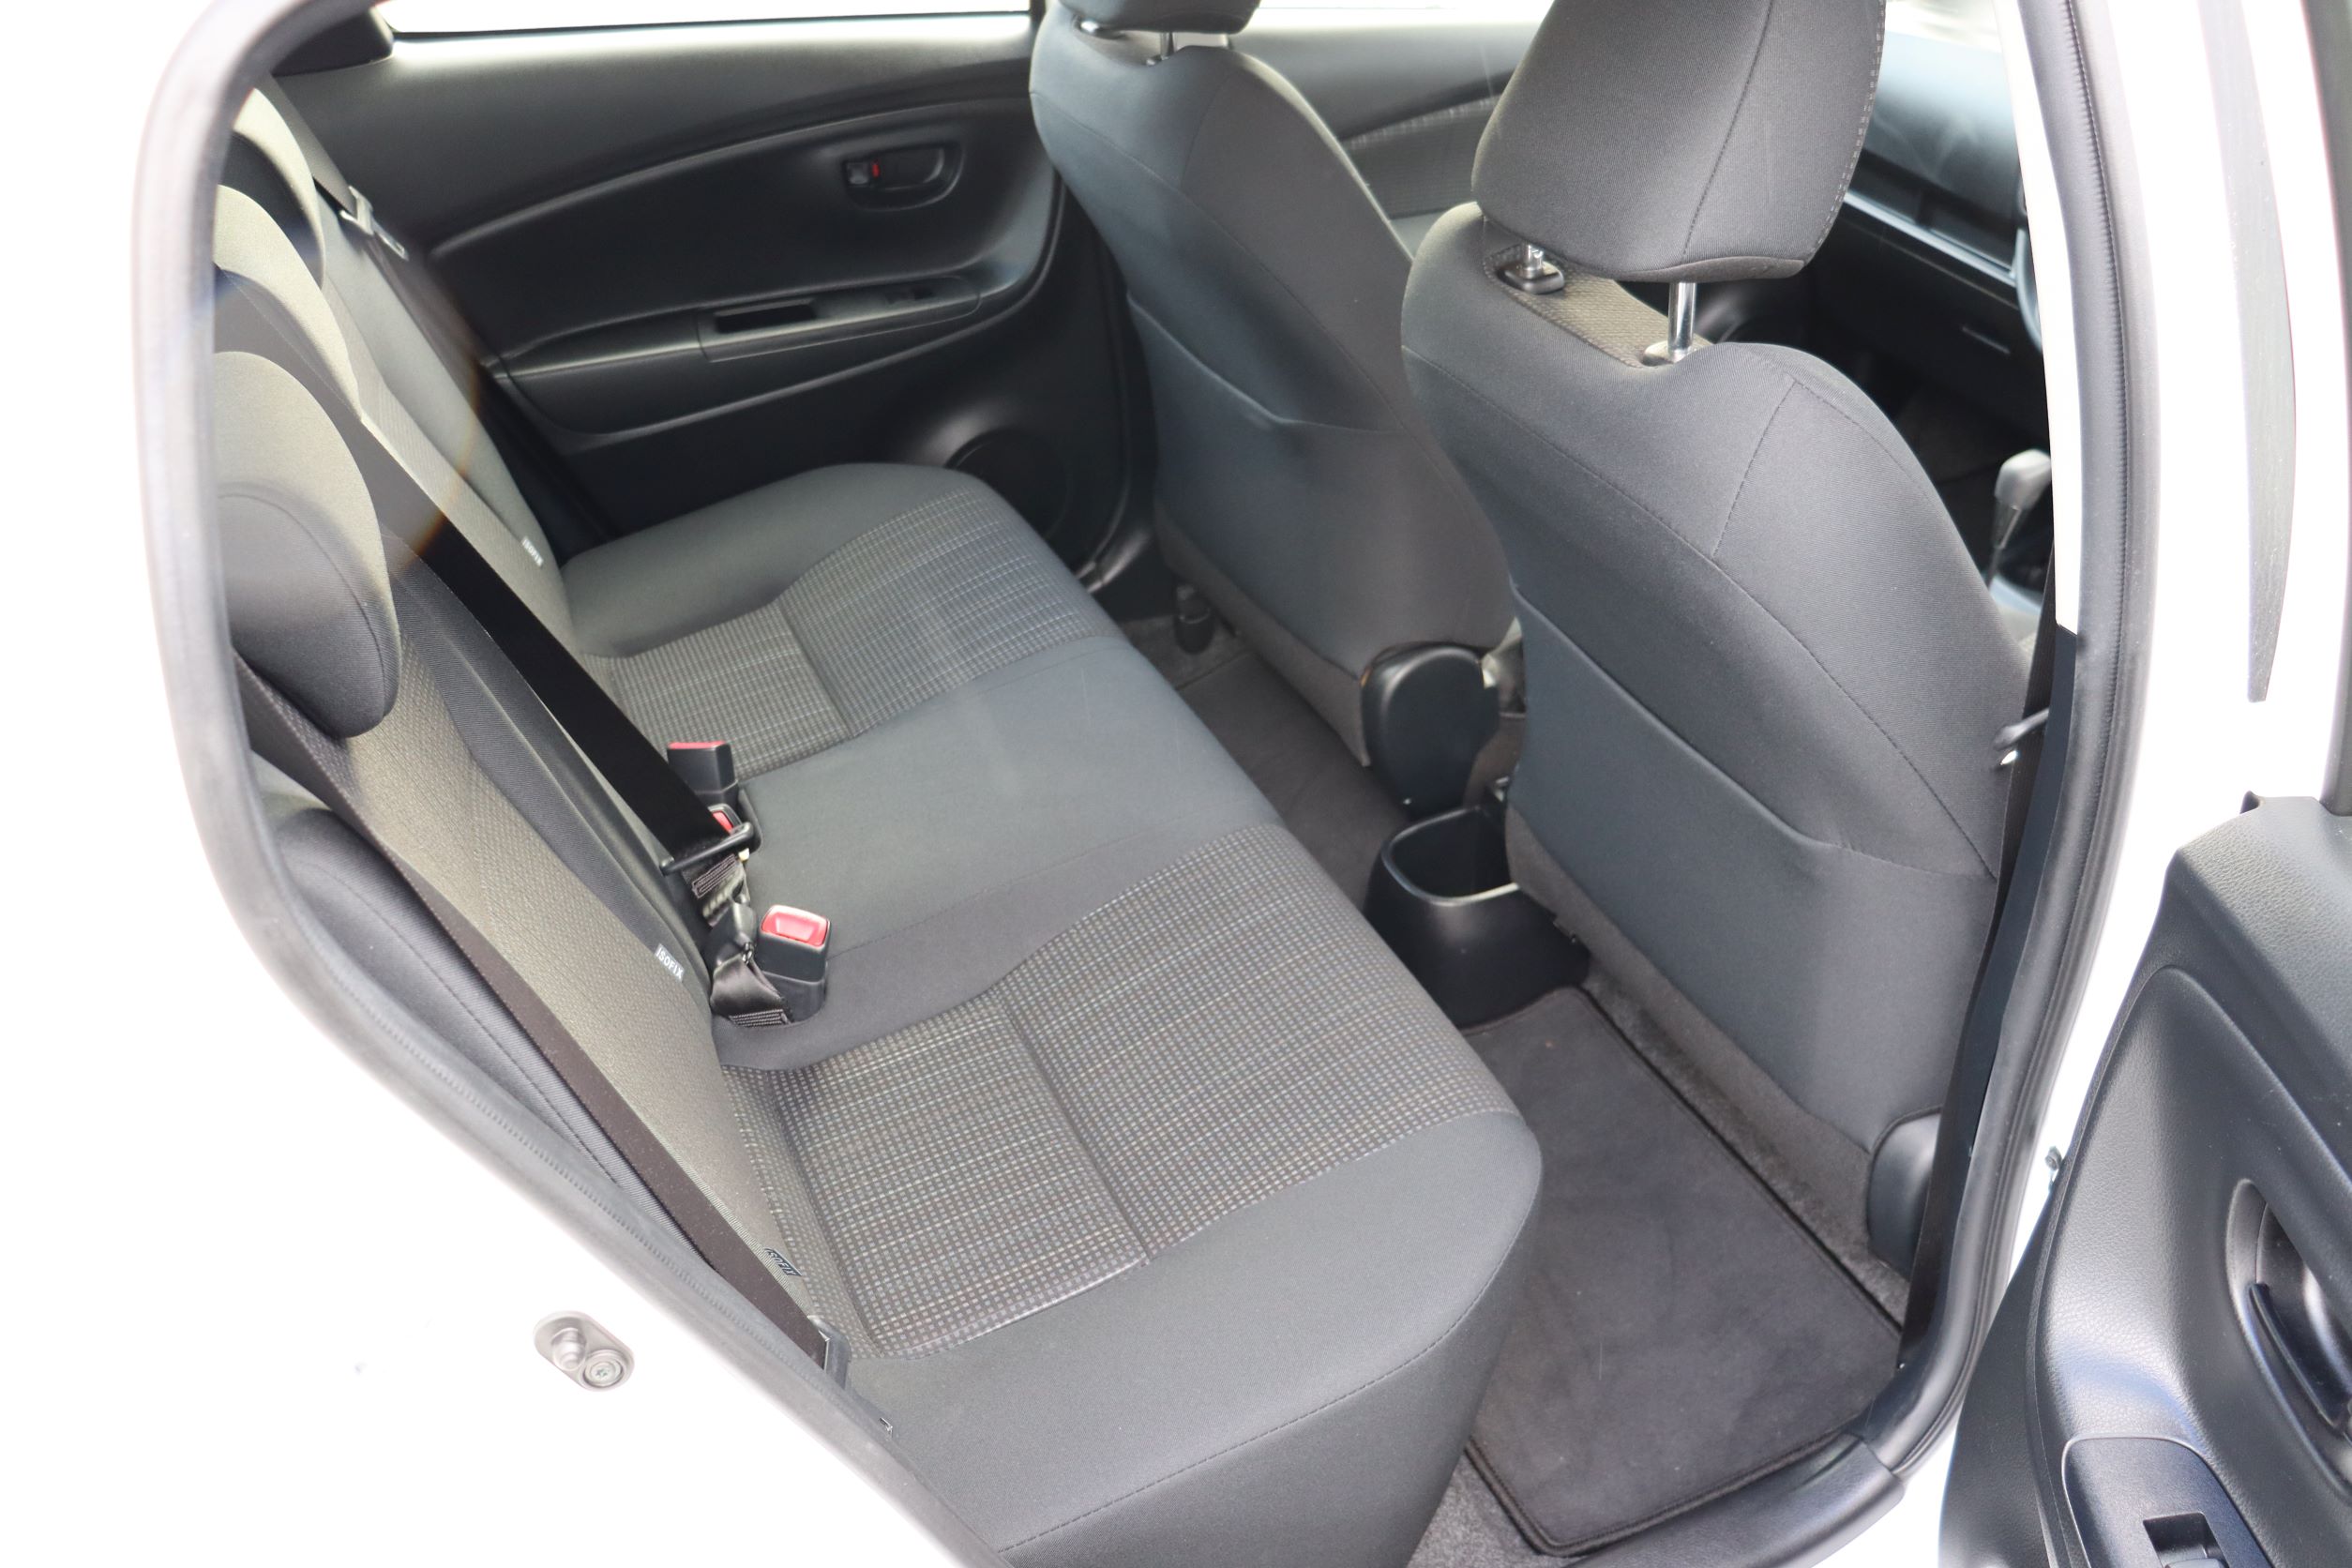 Toyota Yaris GX 2018 for sale in Auckland